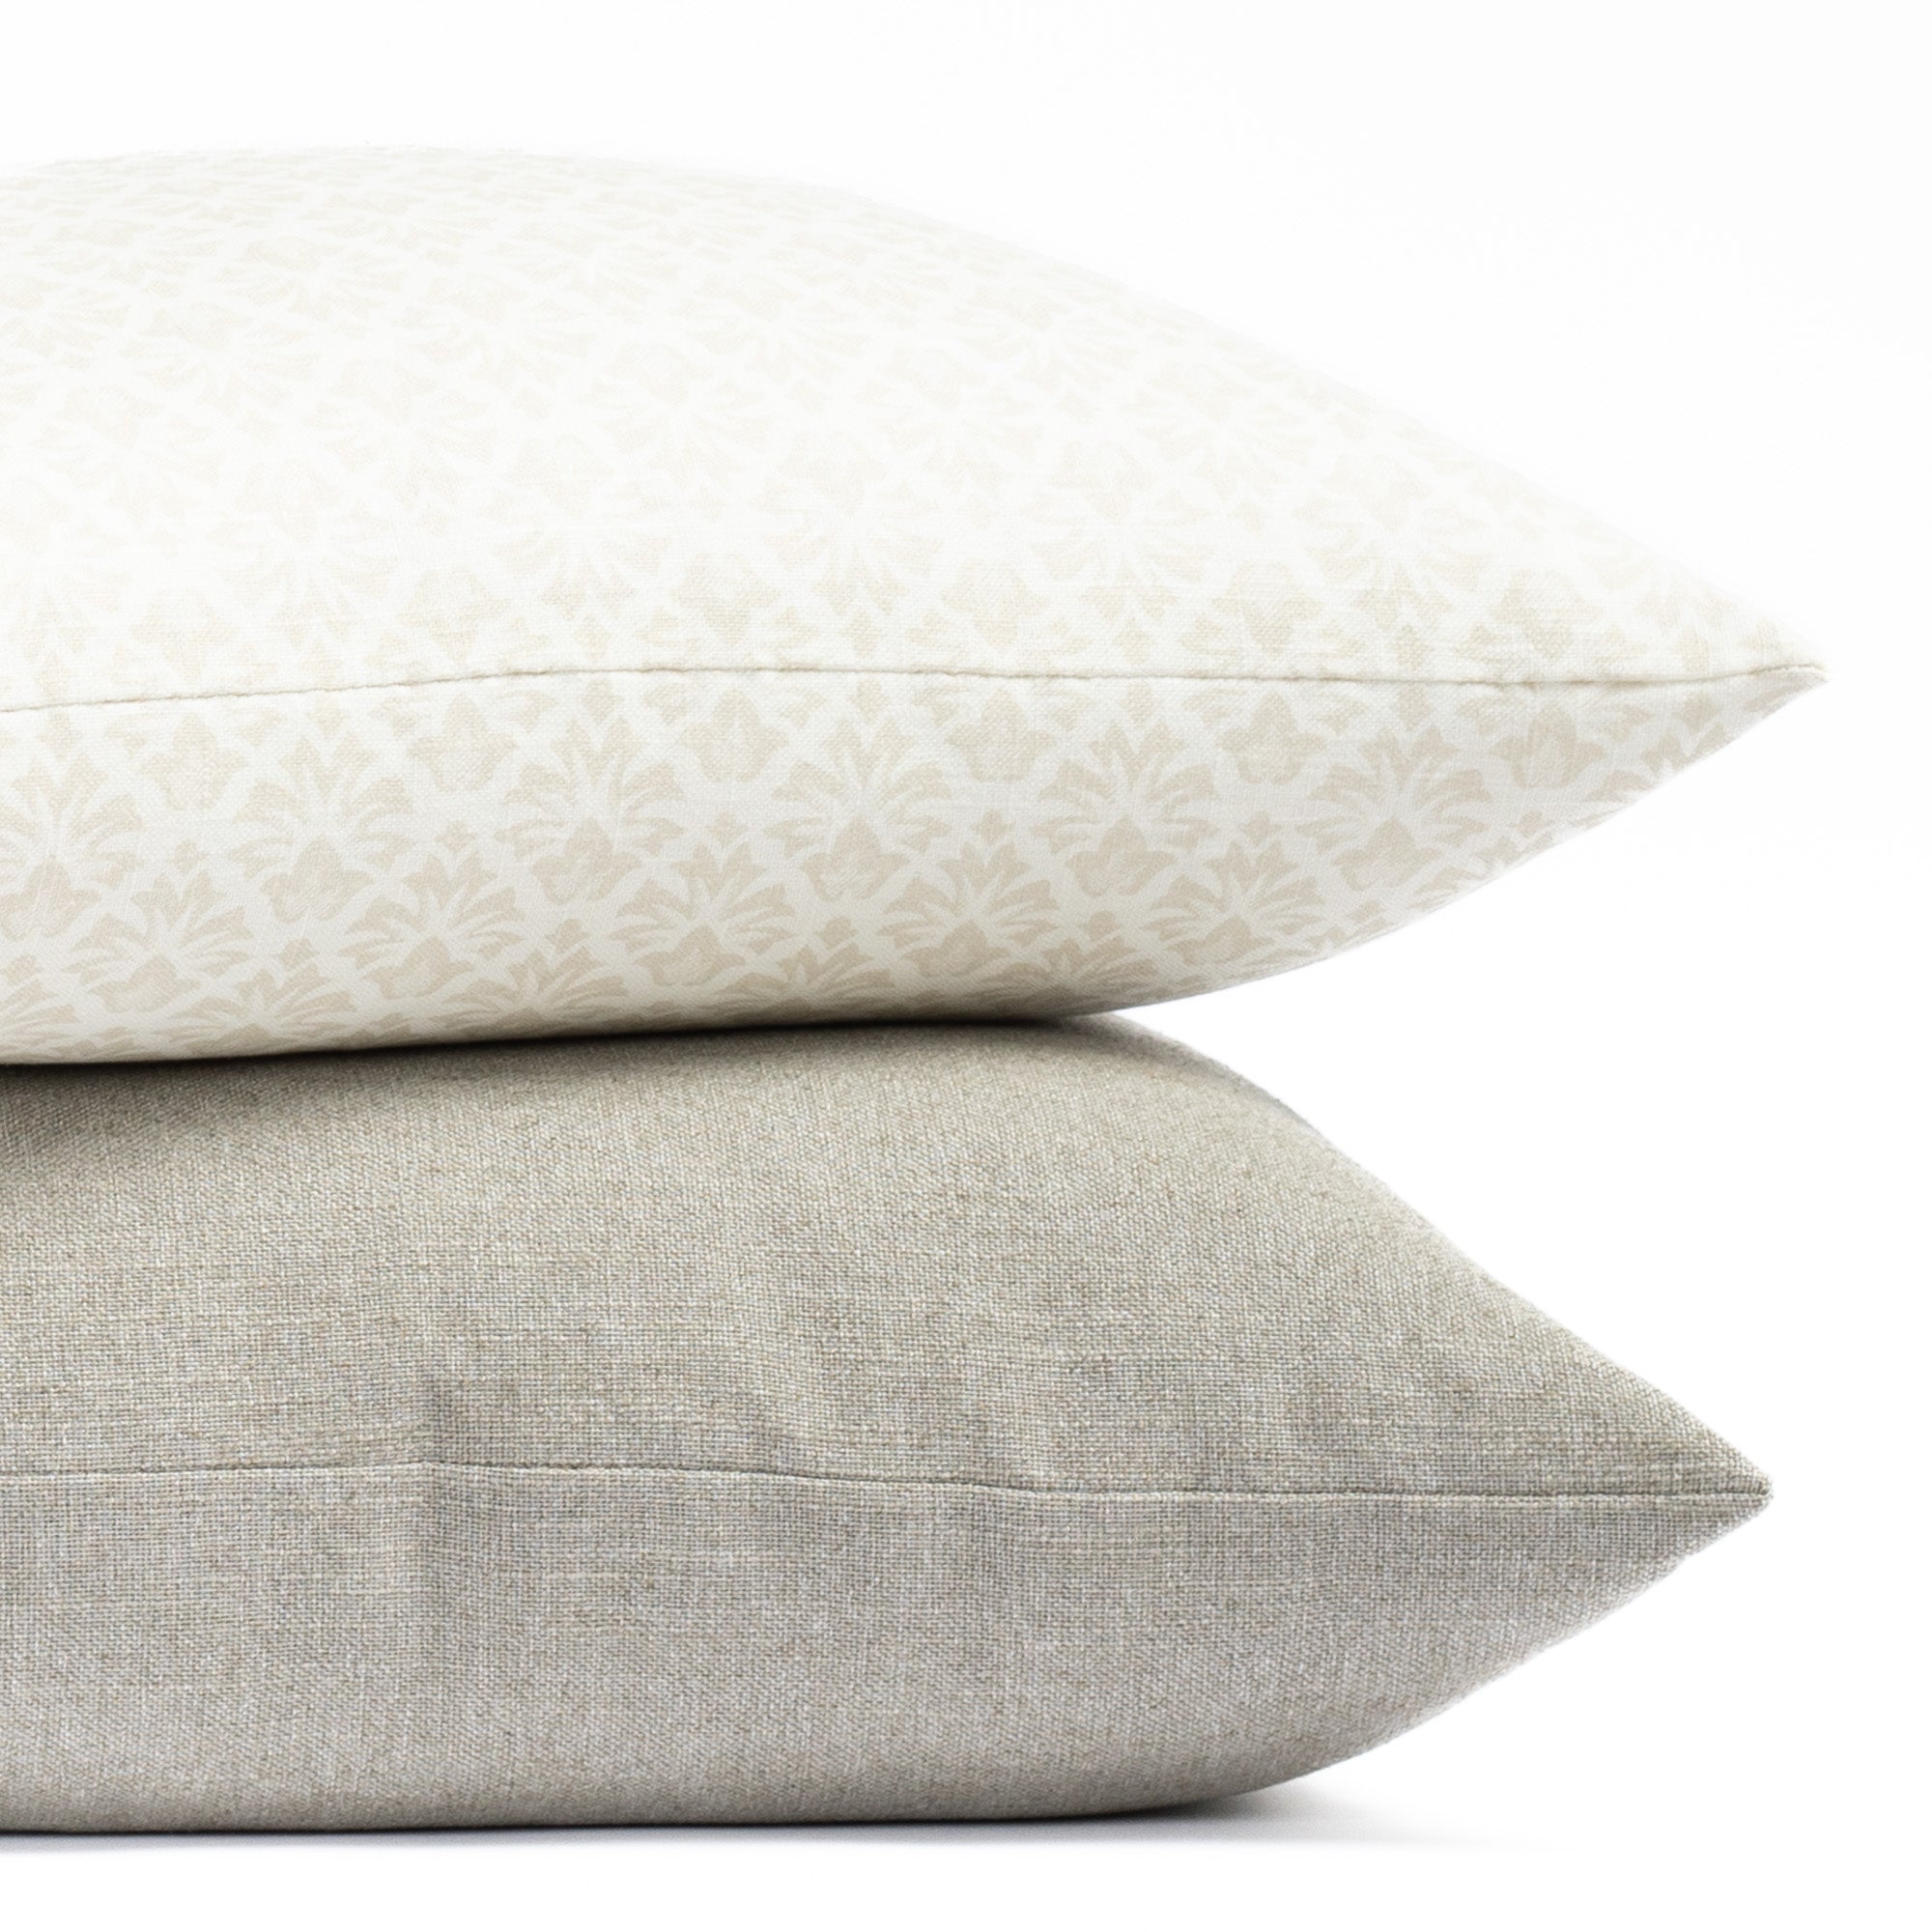 Calli Parchment and Oxford Sage throw pillow pairing